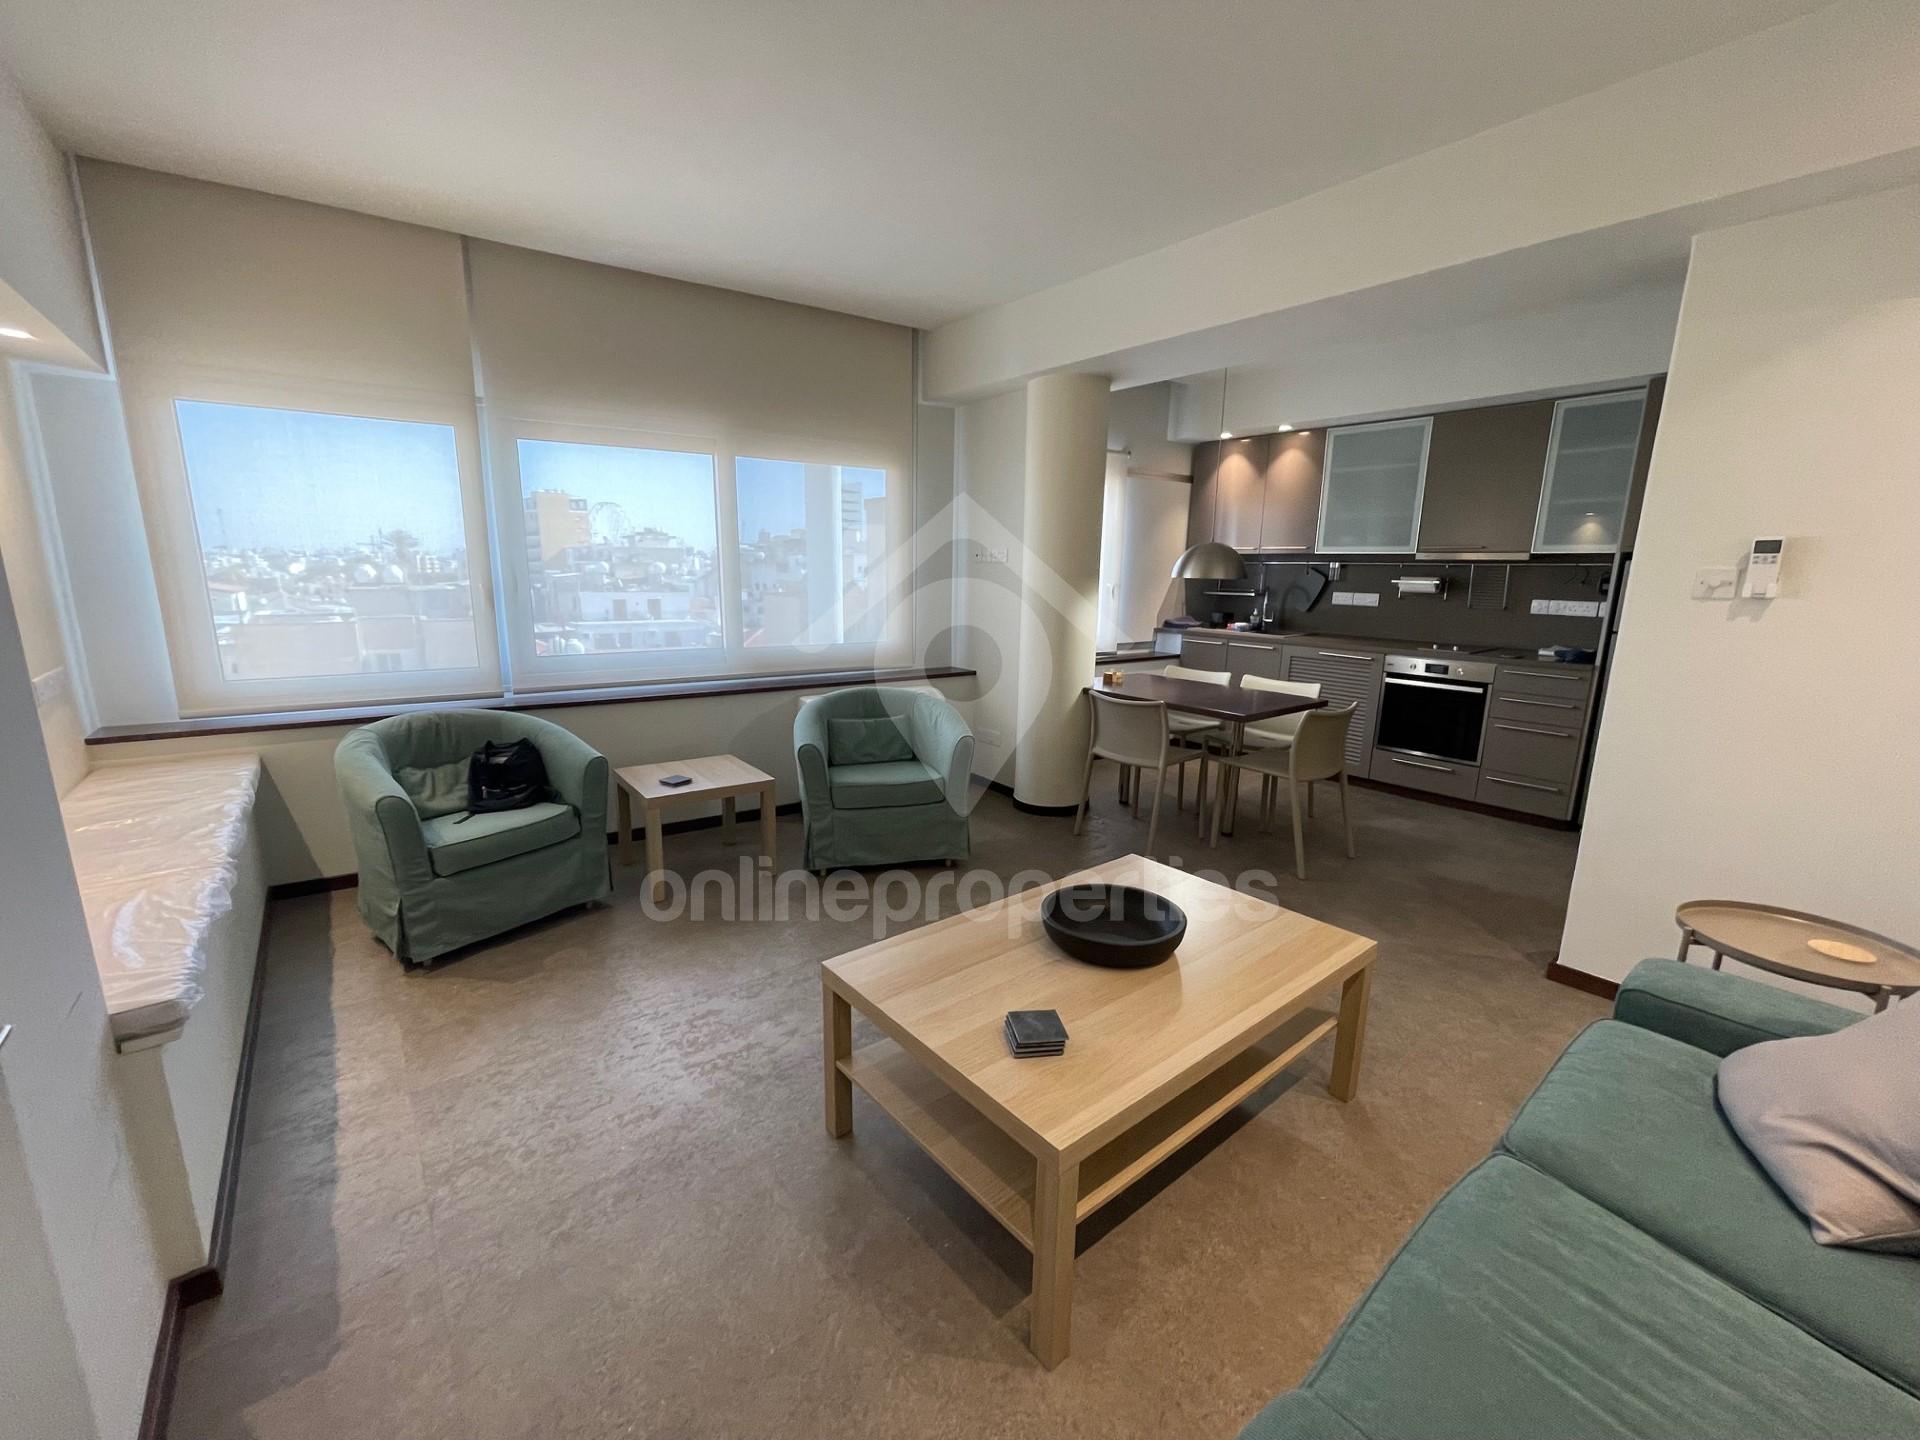 A super modern, spectacular fully renovated   & furnished 2-bedroom/ Price includes common expenses,Internet,Cytavision and garbage disposal fees